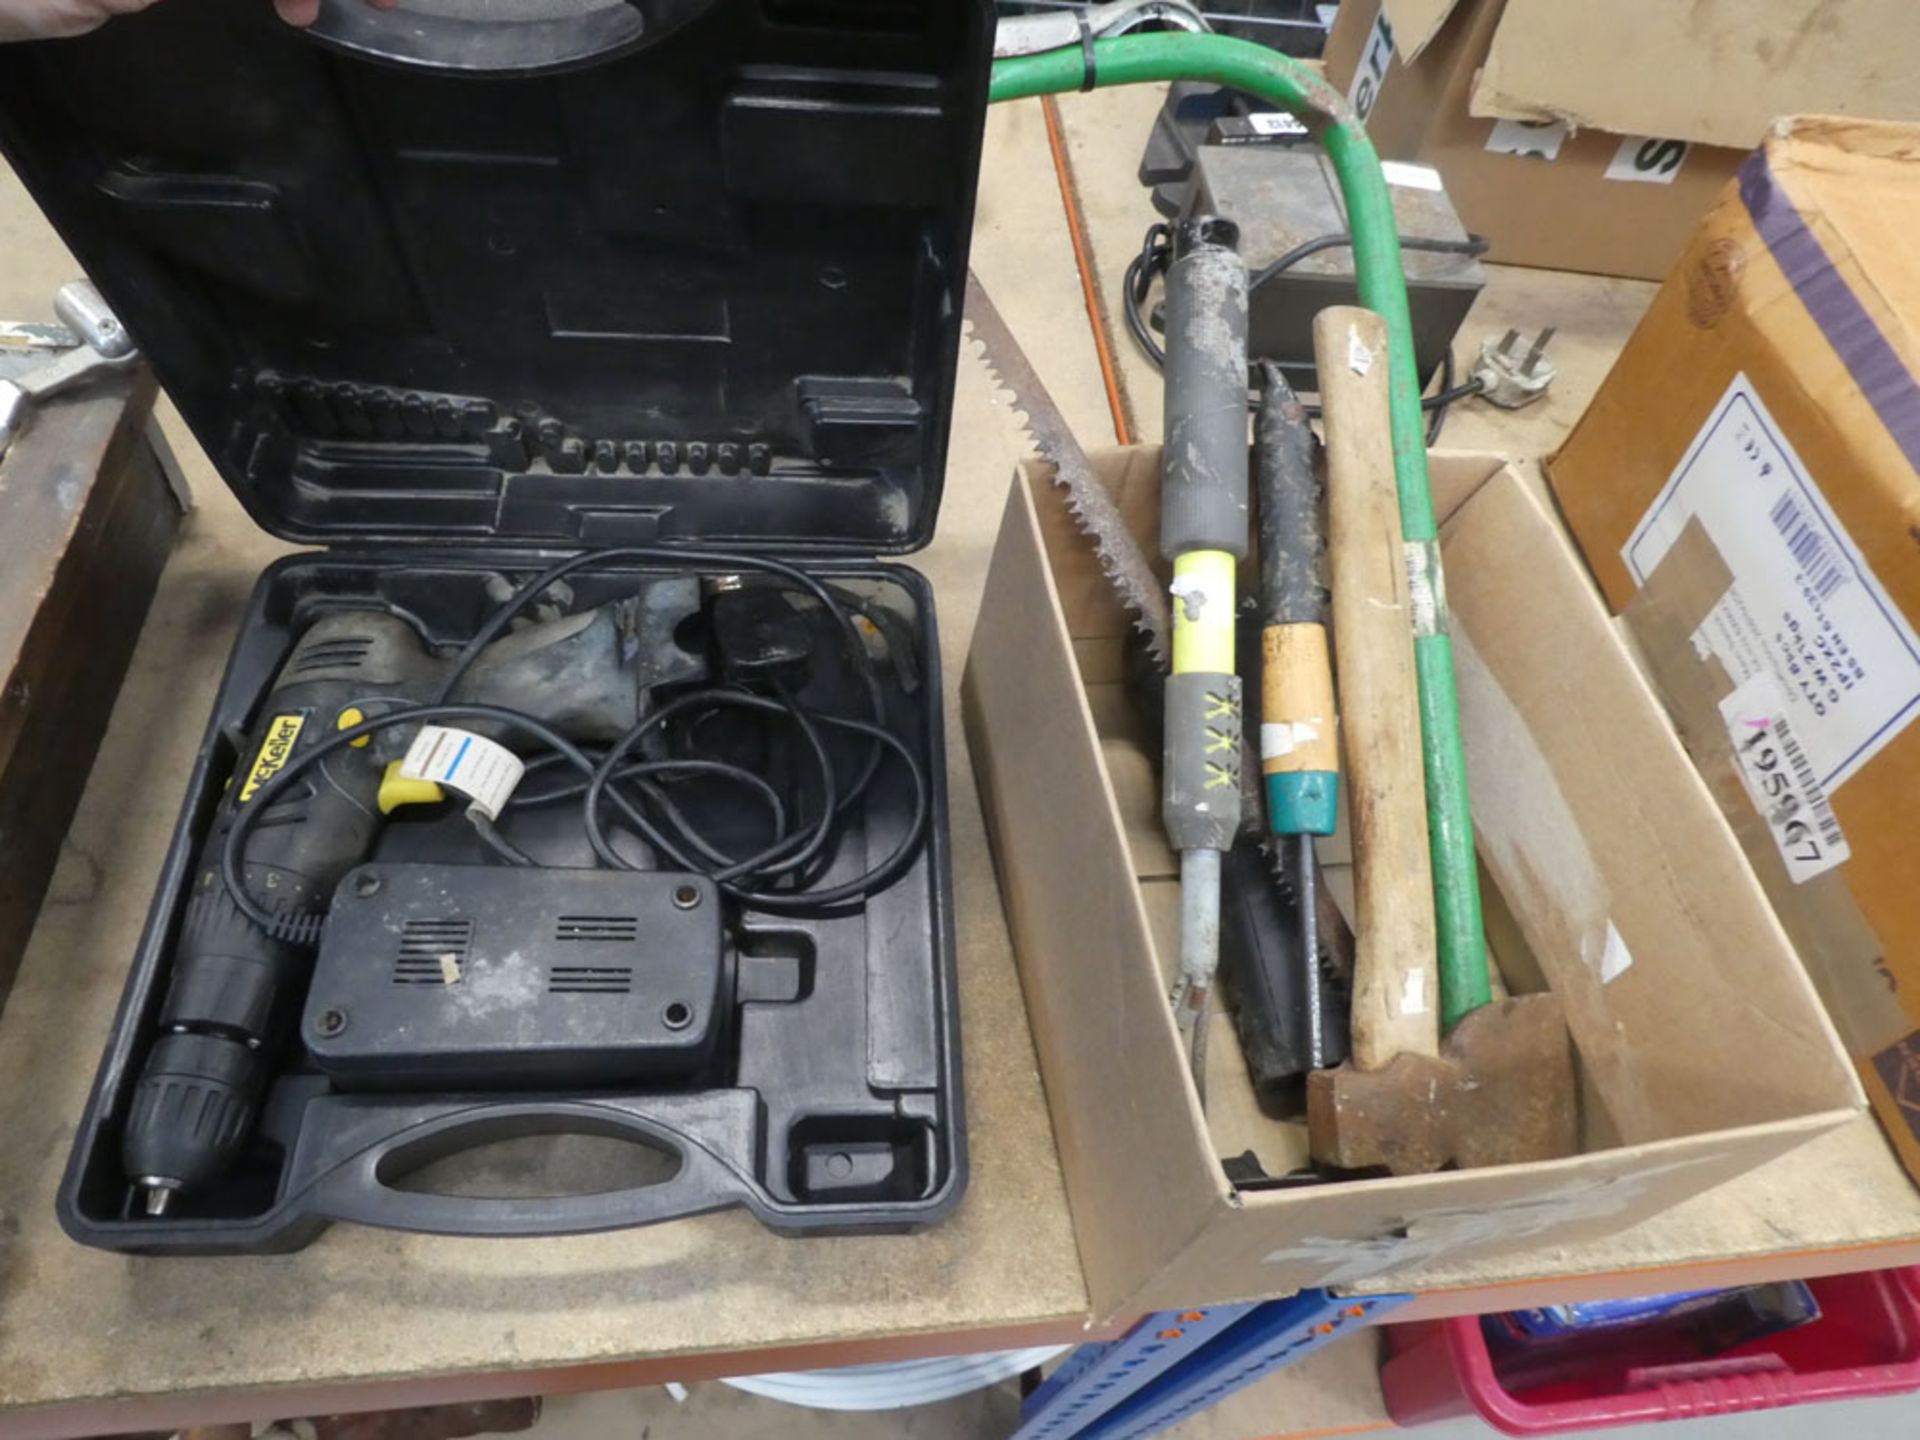 McKeler battery drill, no battery, 1 charger plus a small box cont. axe, saw and a torch